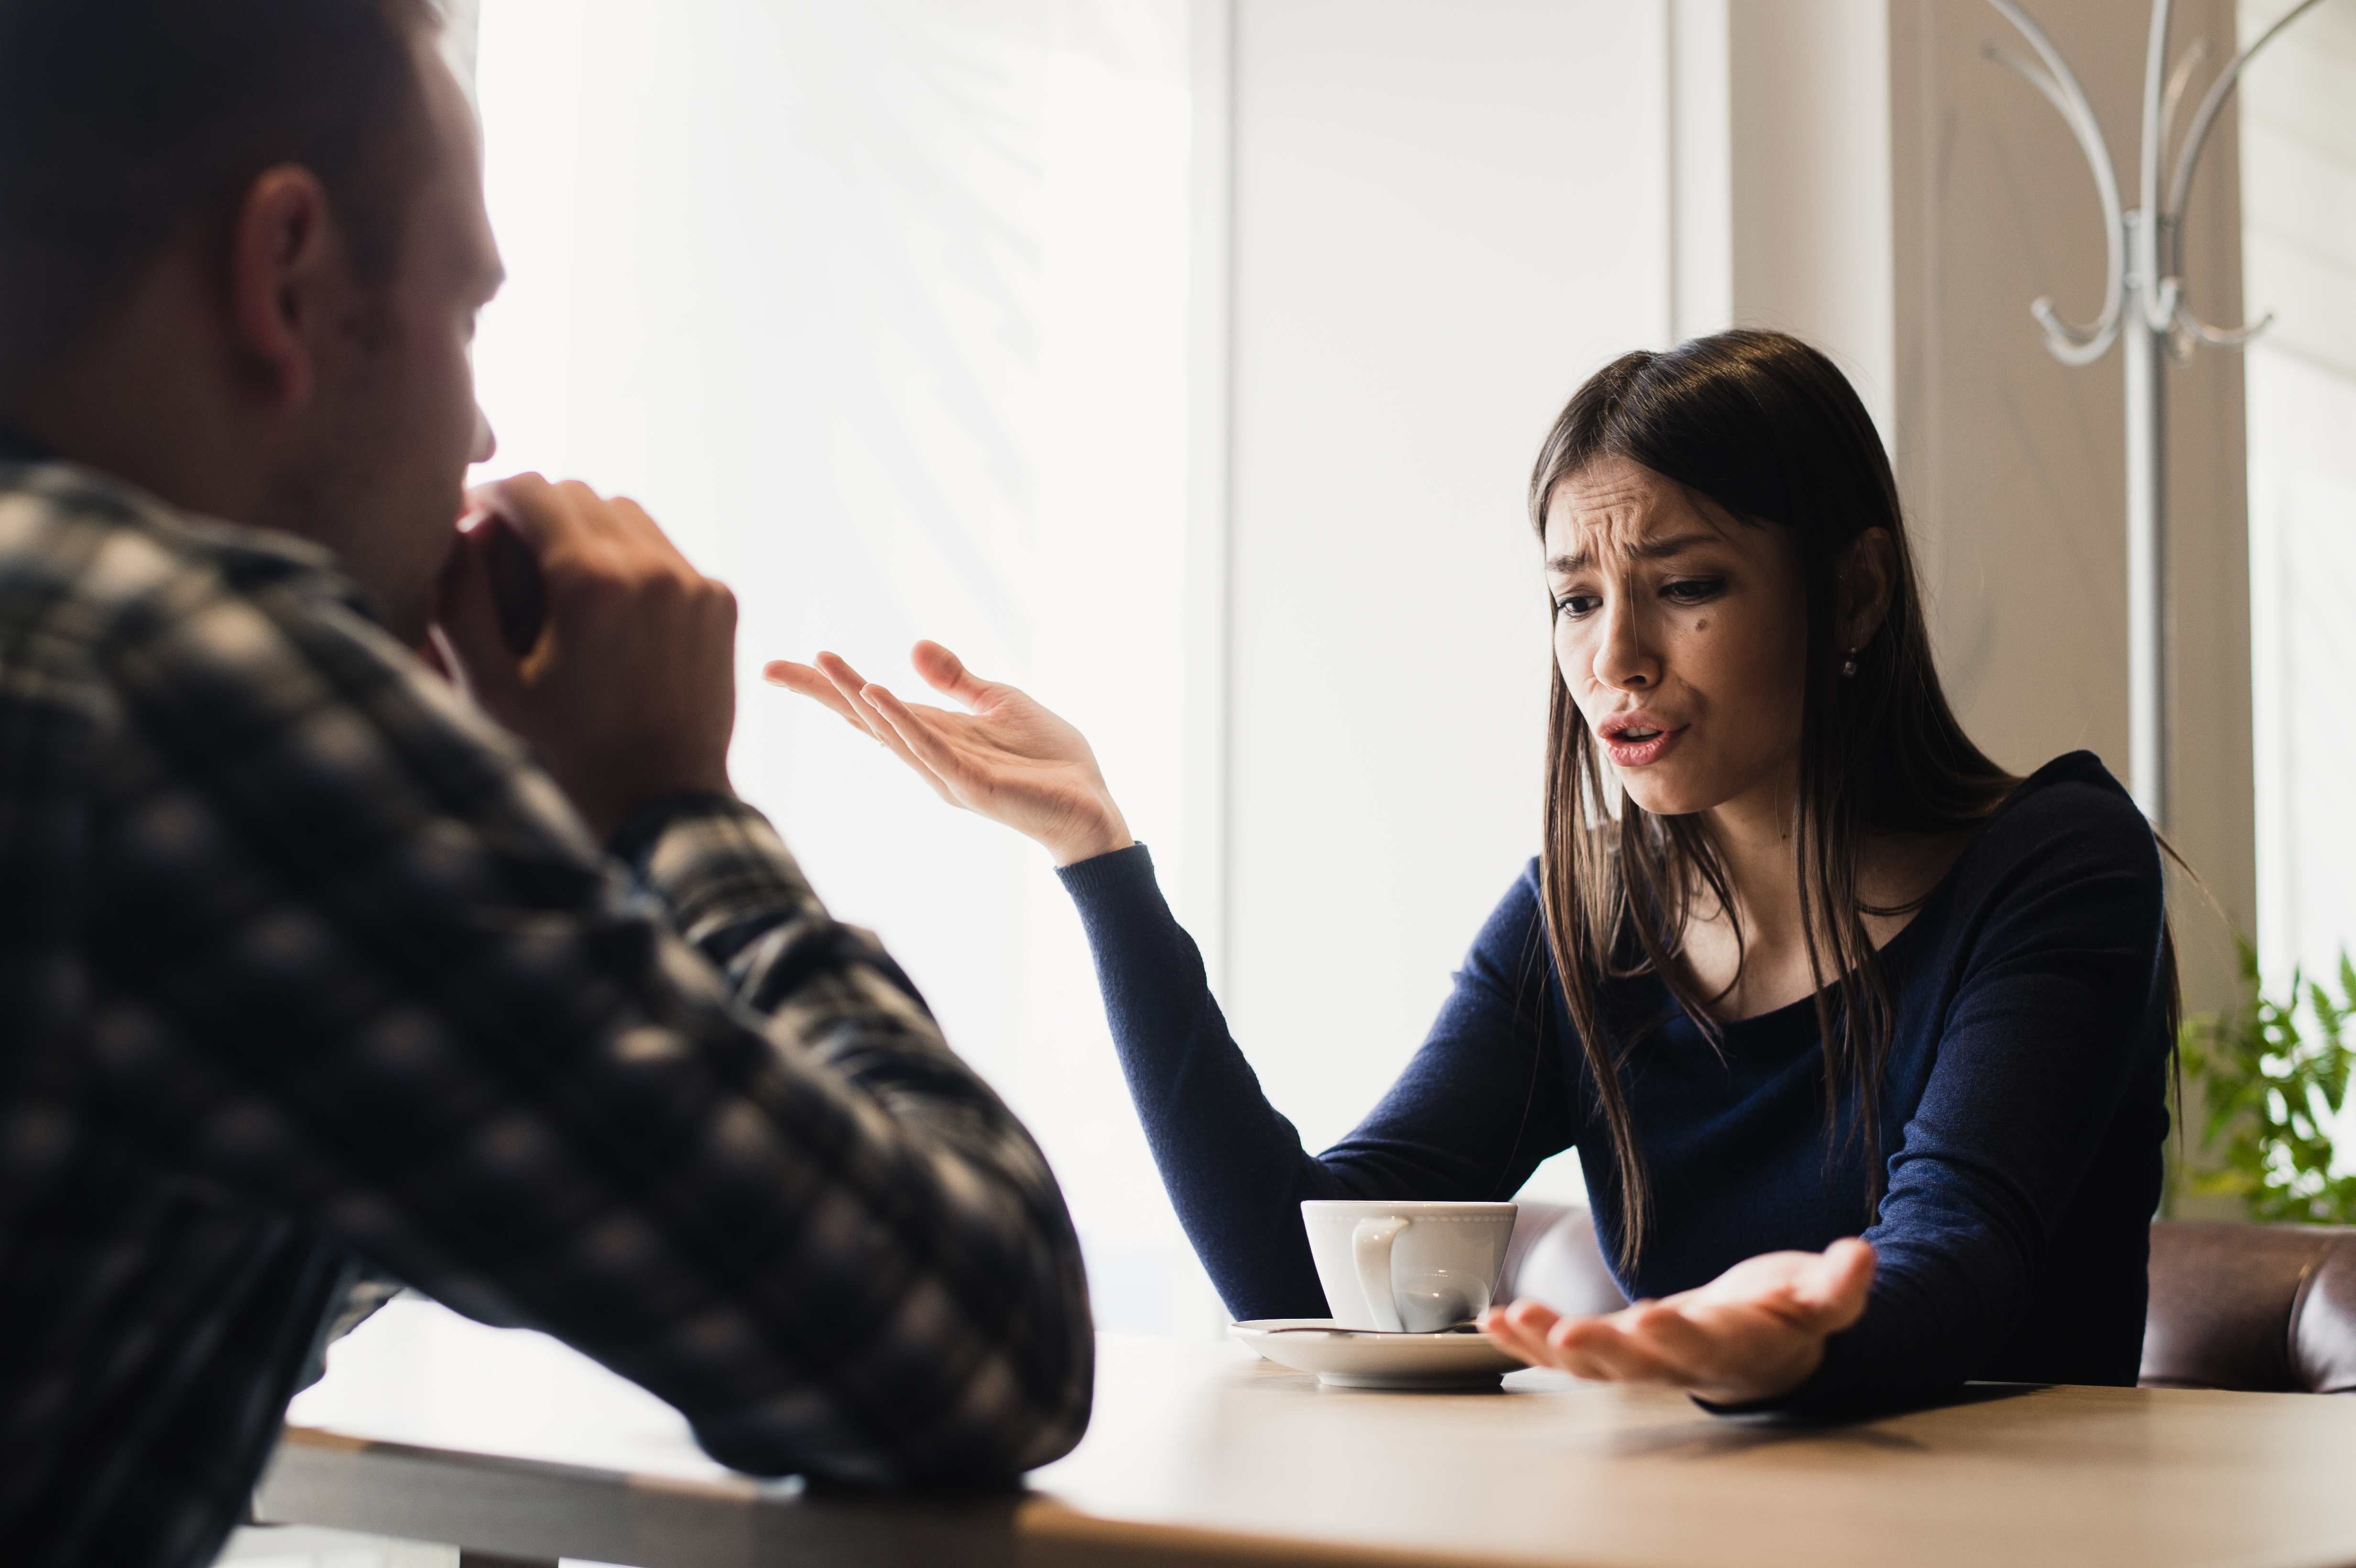 Sad woman tells a story to a youg man in cafe. | Source: Shutterstock